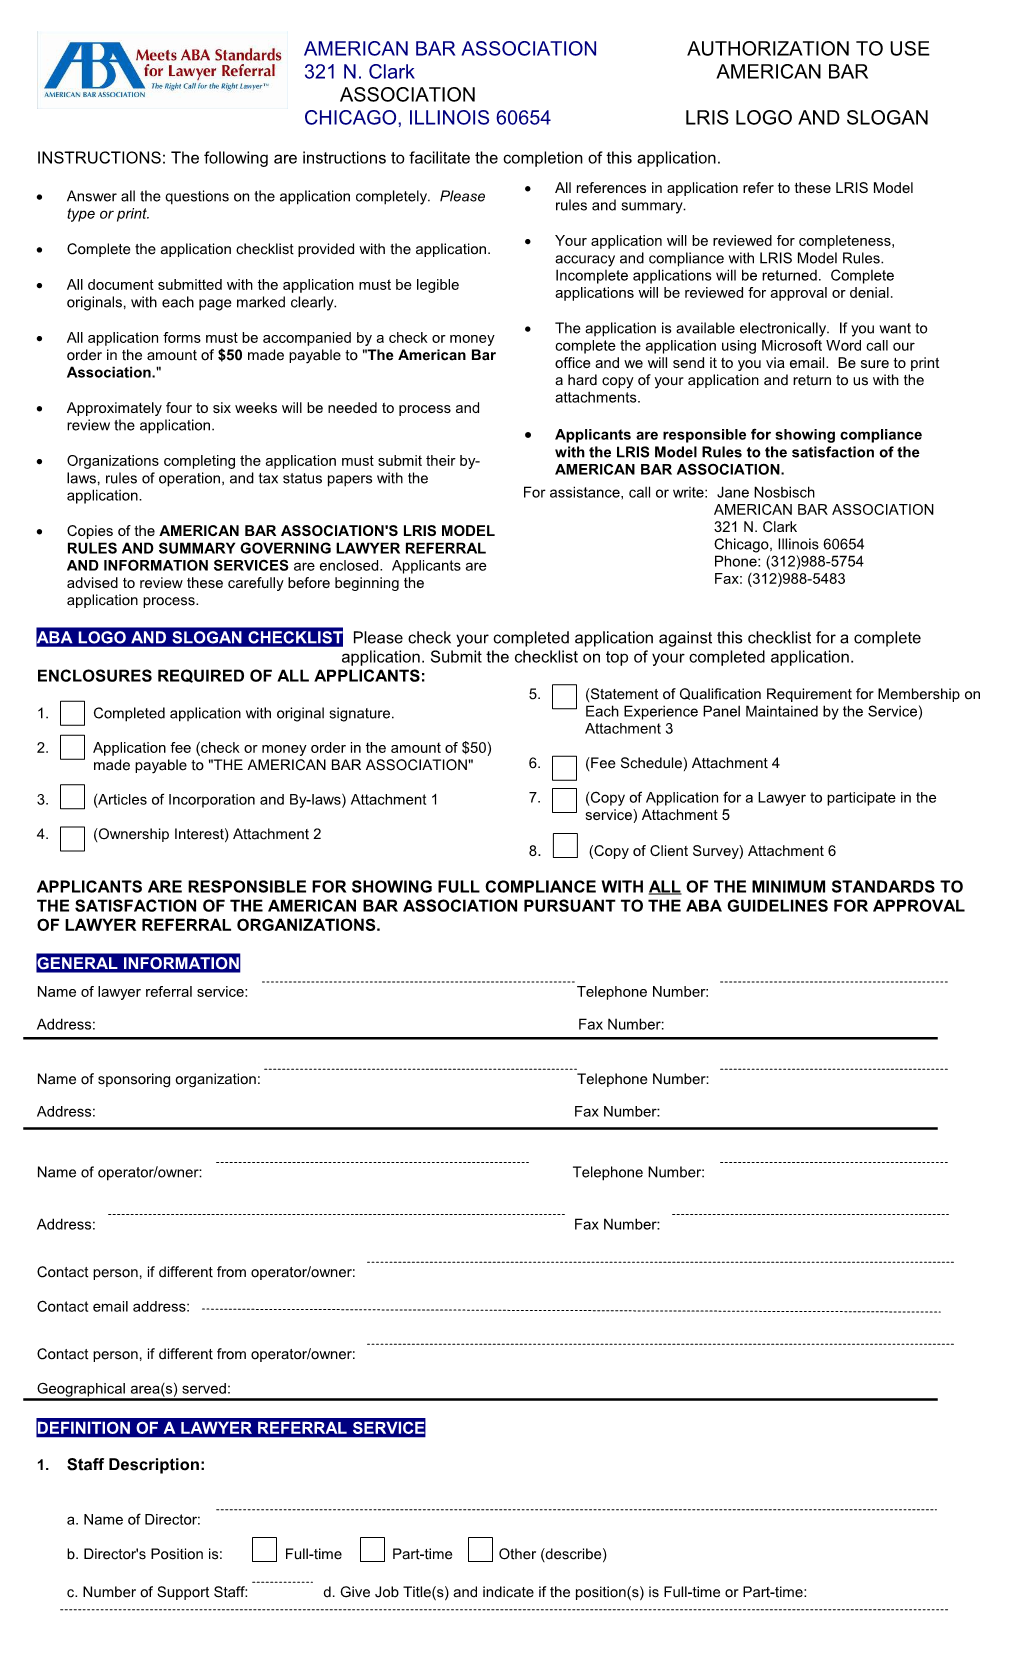 Meets ABA Standards for Lawyer Referral - Logo Application Form